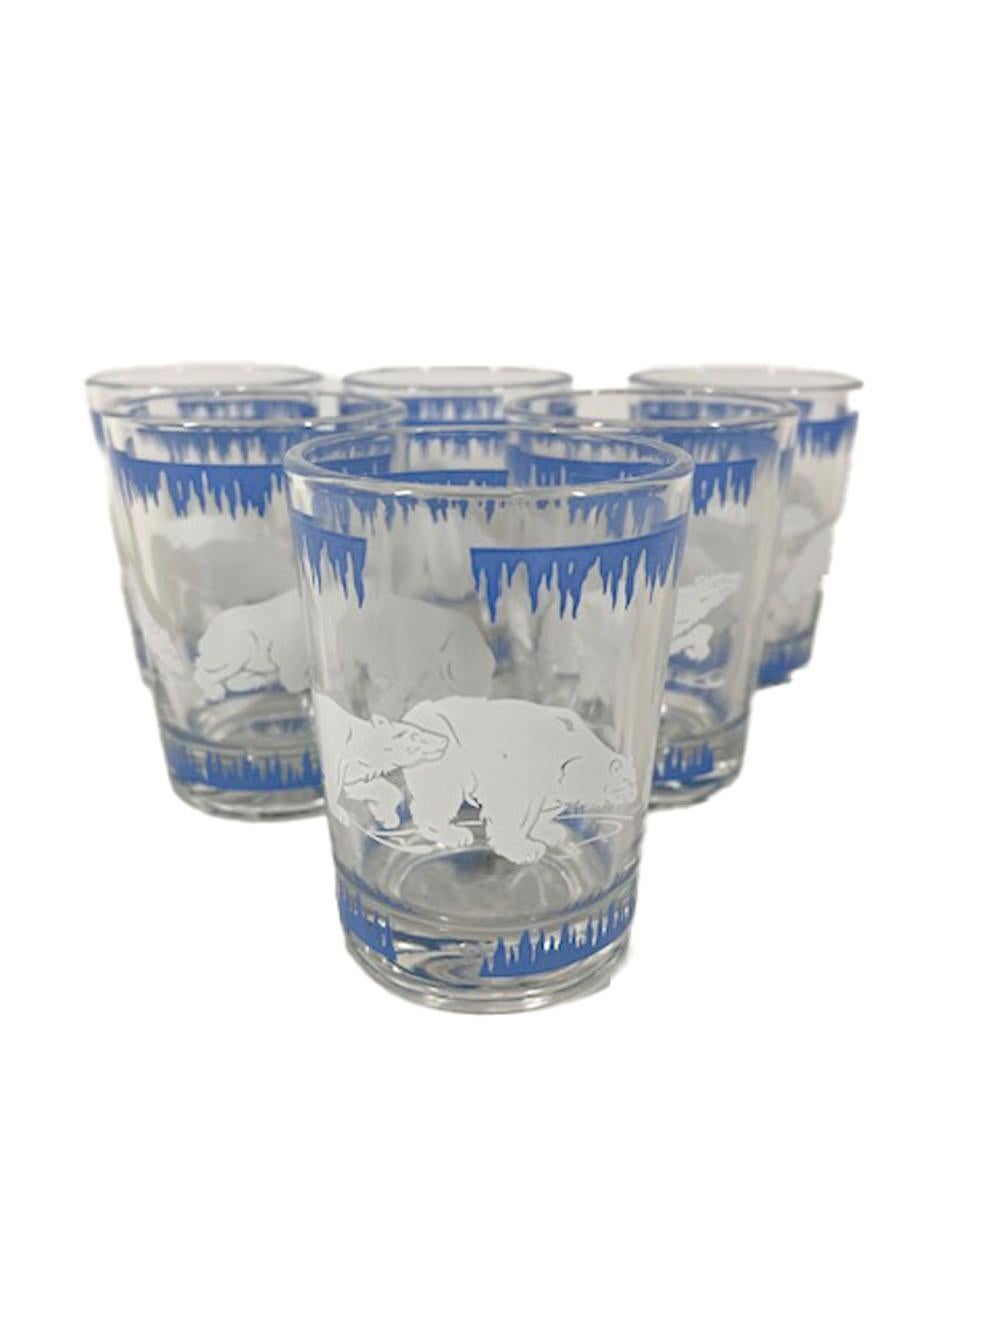 Eight piece Art Deco cocktail set comprising a chrome lidded cocktail shaker, ice bowl and six cocktail glasses. decorated with a band of blue ice above and below white polar bears.